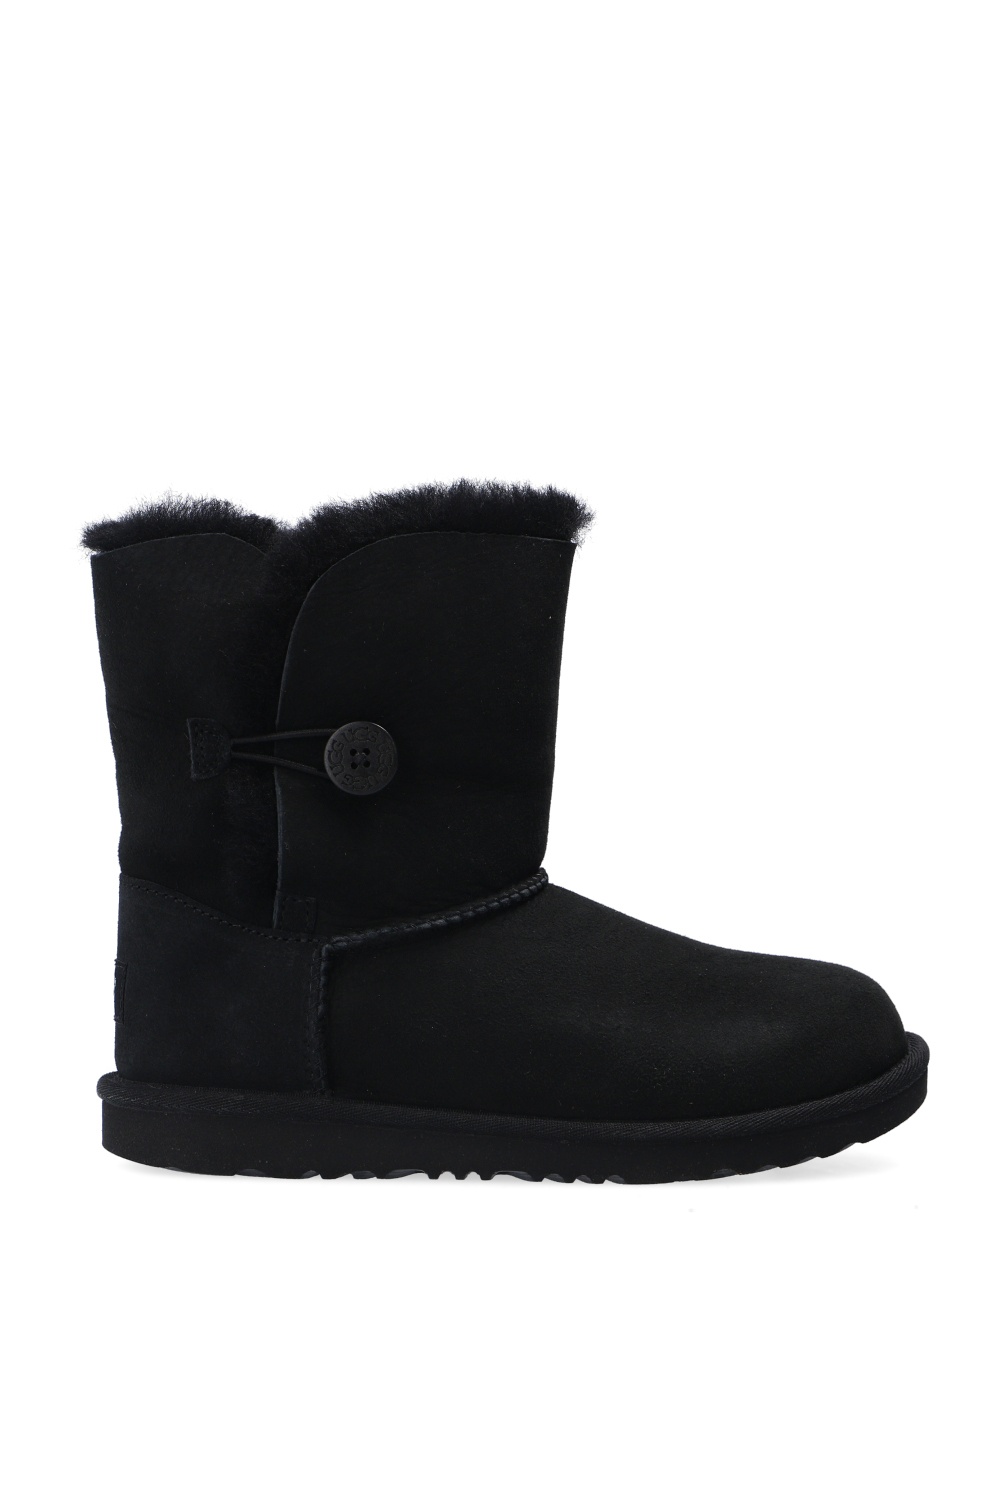 ugg New Kids ‘K Bailey Button II’ snow boots